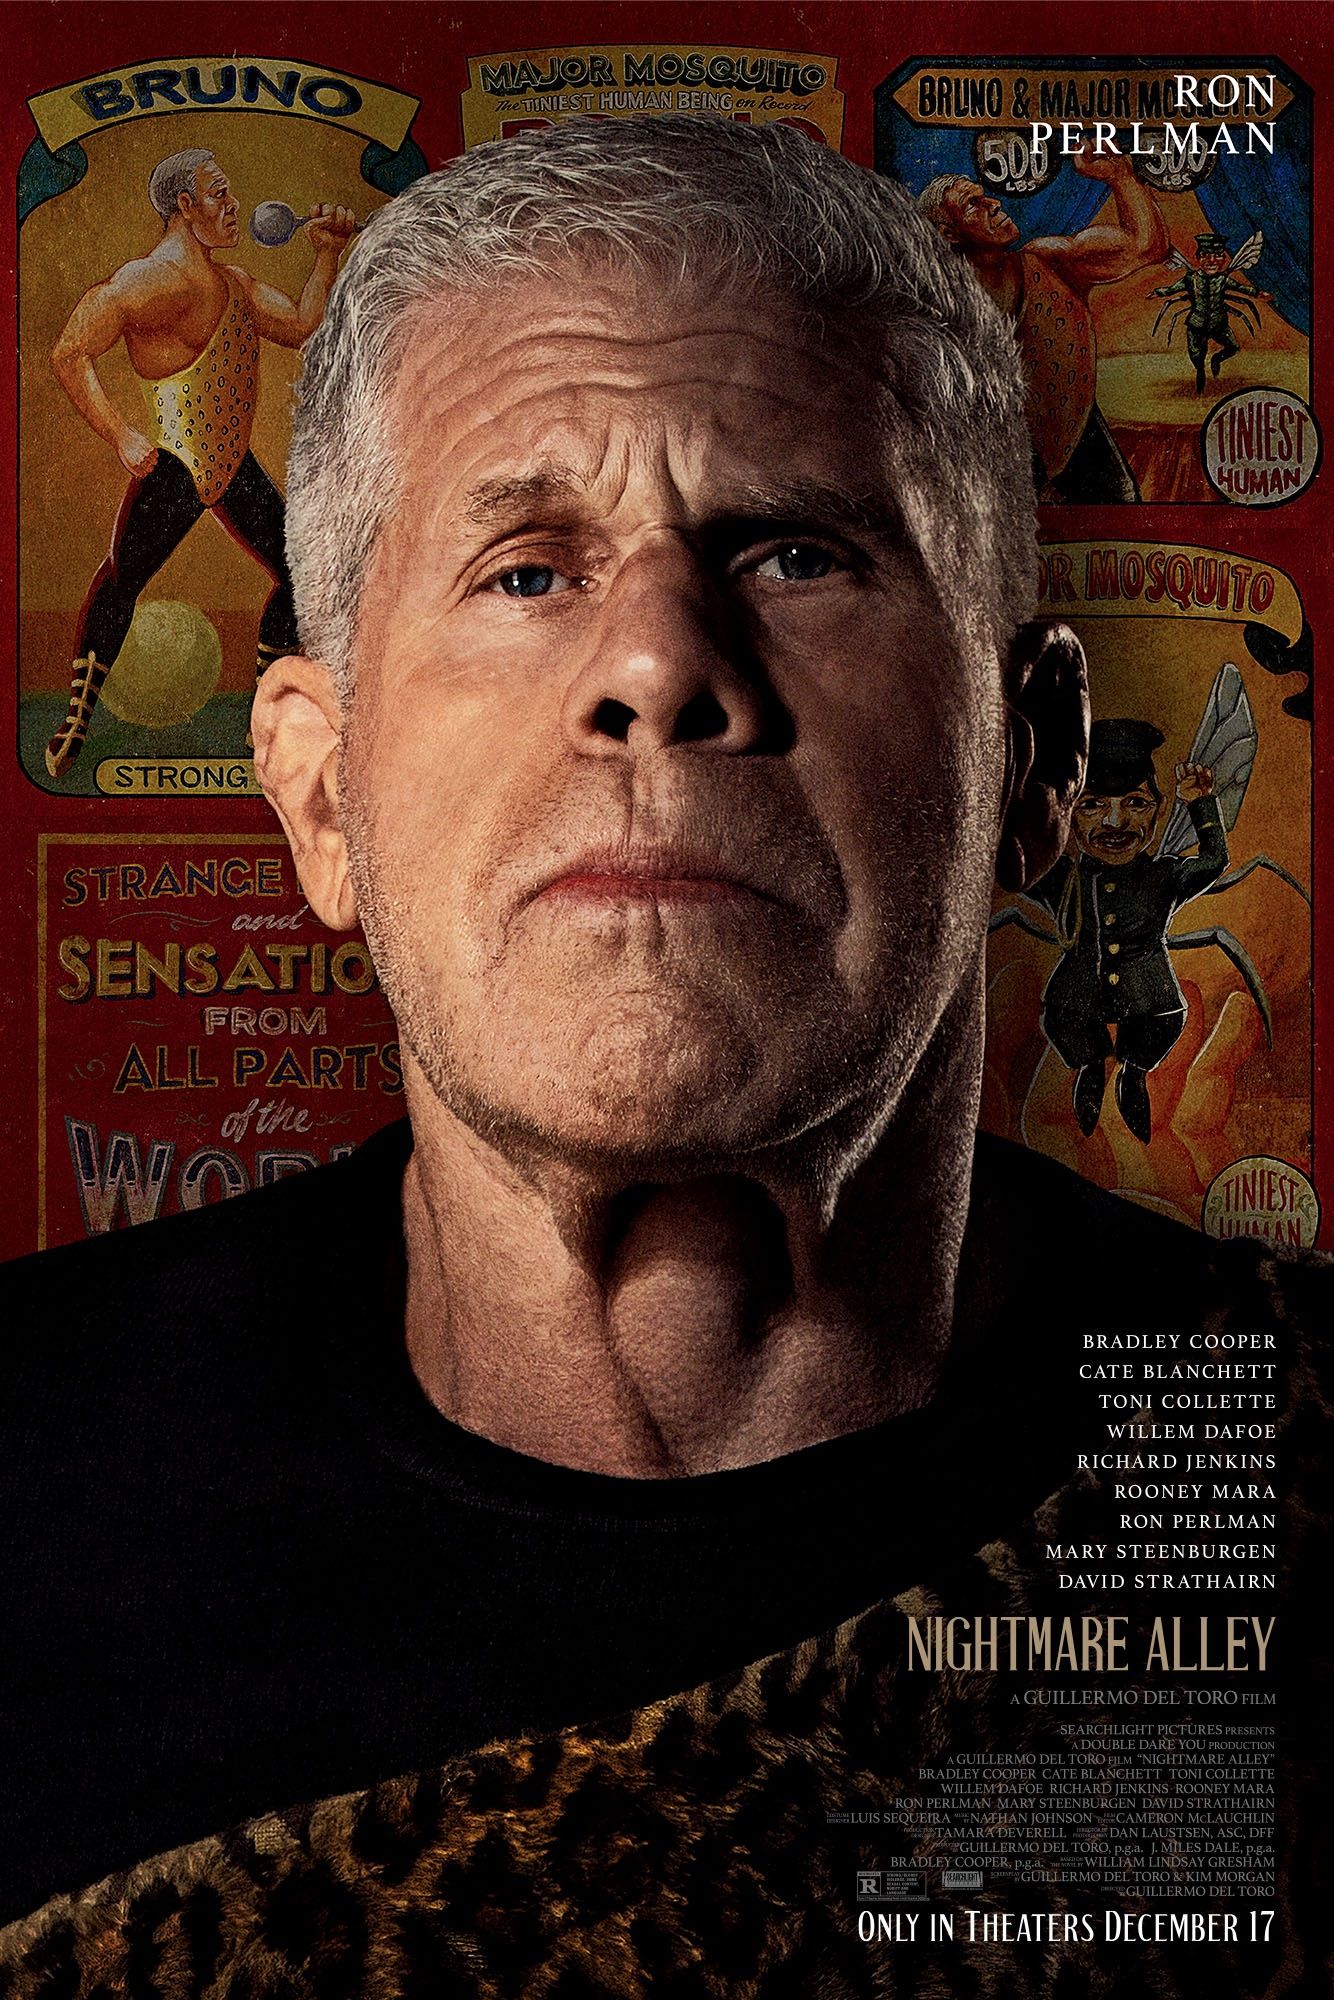 Ron Perlman Nightmare Alley character poster